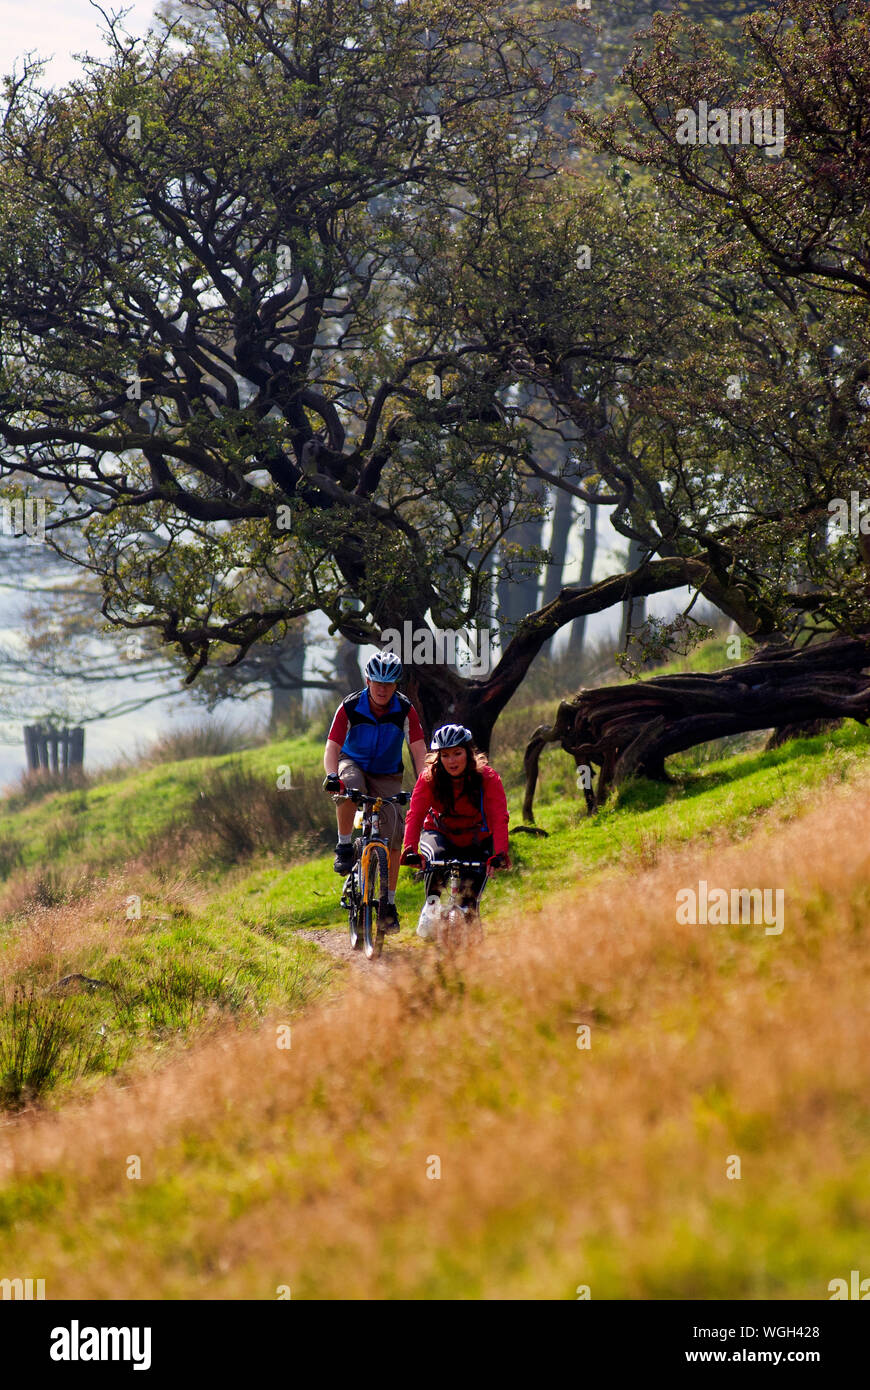 Mountain bikers riding along the UK's new Great North Trail, a 800 mile long distance off-road cycle route from Middleton Top, Wirksworth, Derbyshire through the Peak District all the way up to Cape Wrath or John o'Groats, Scotland. Stock Photo